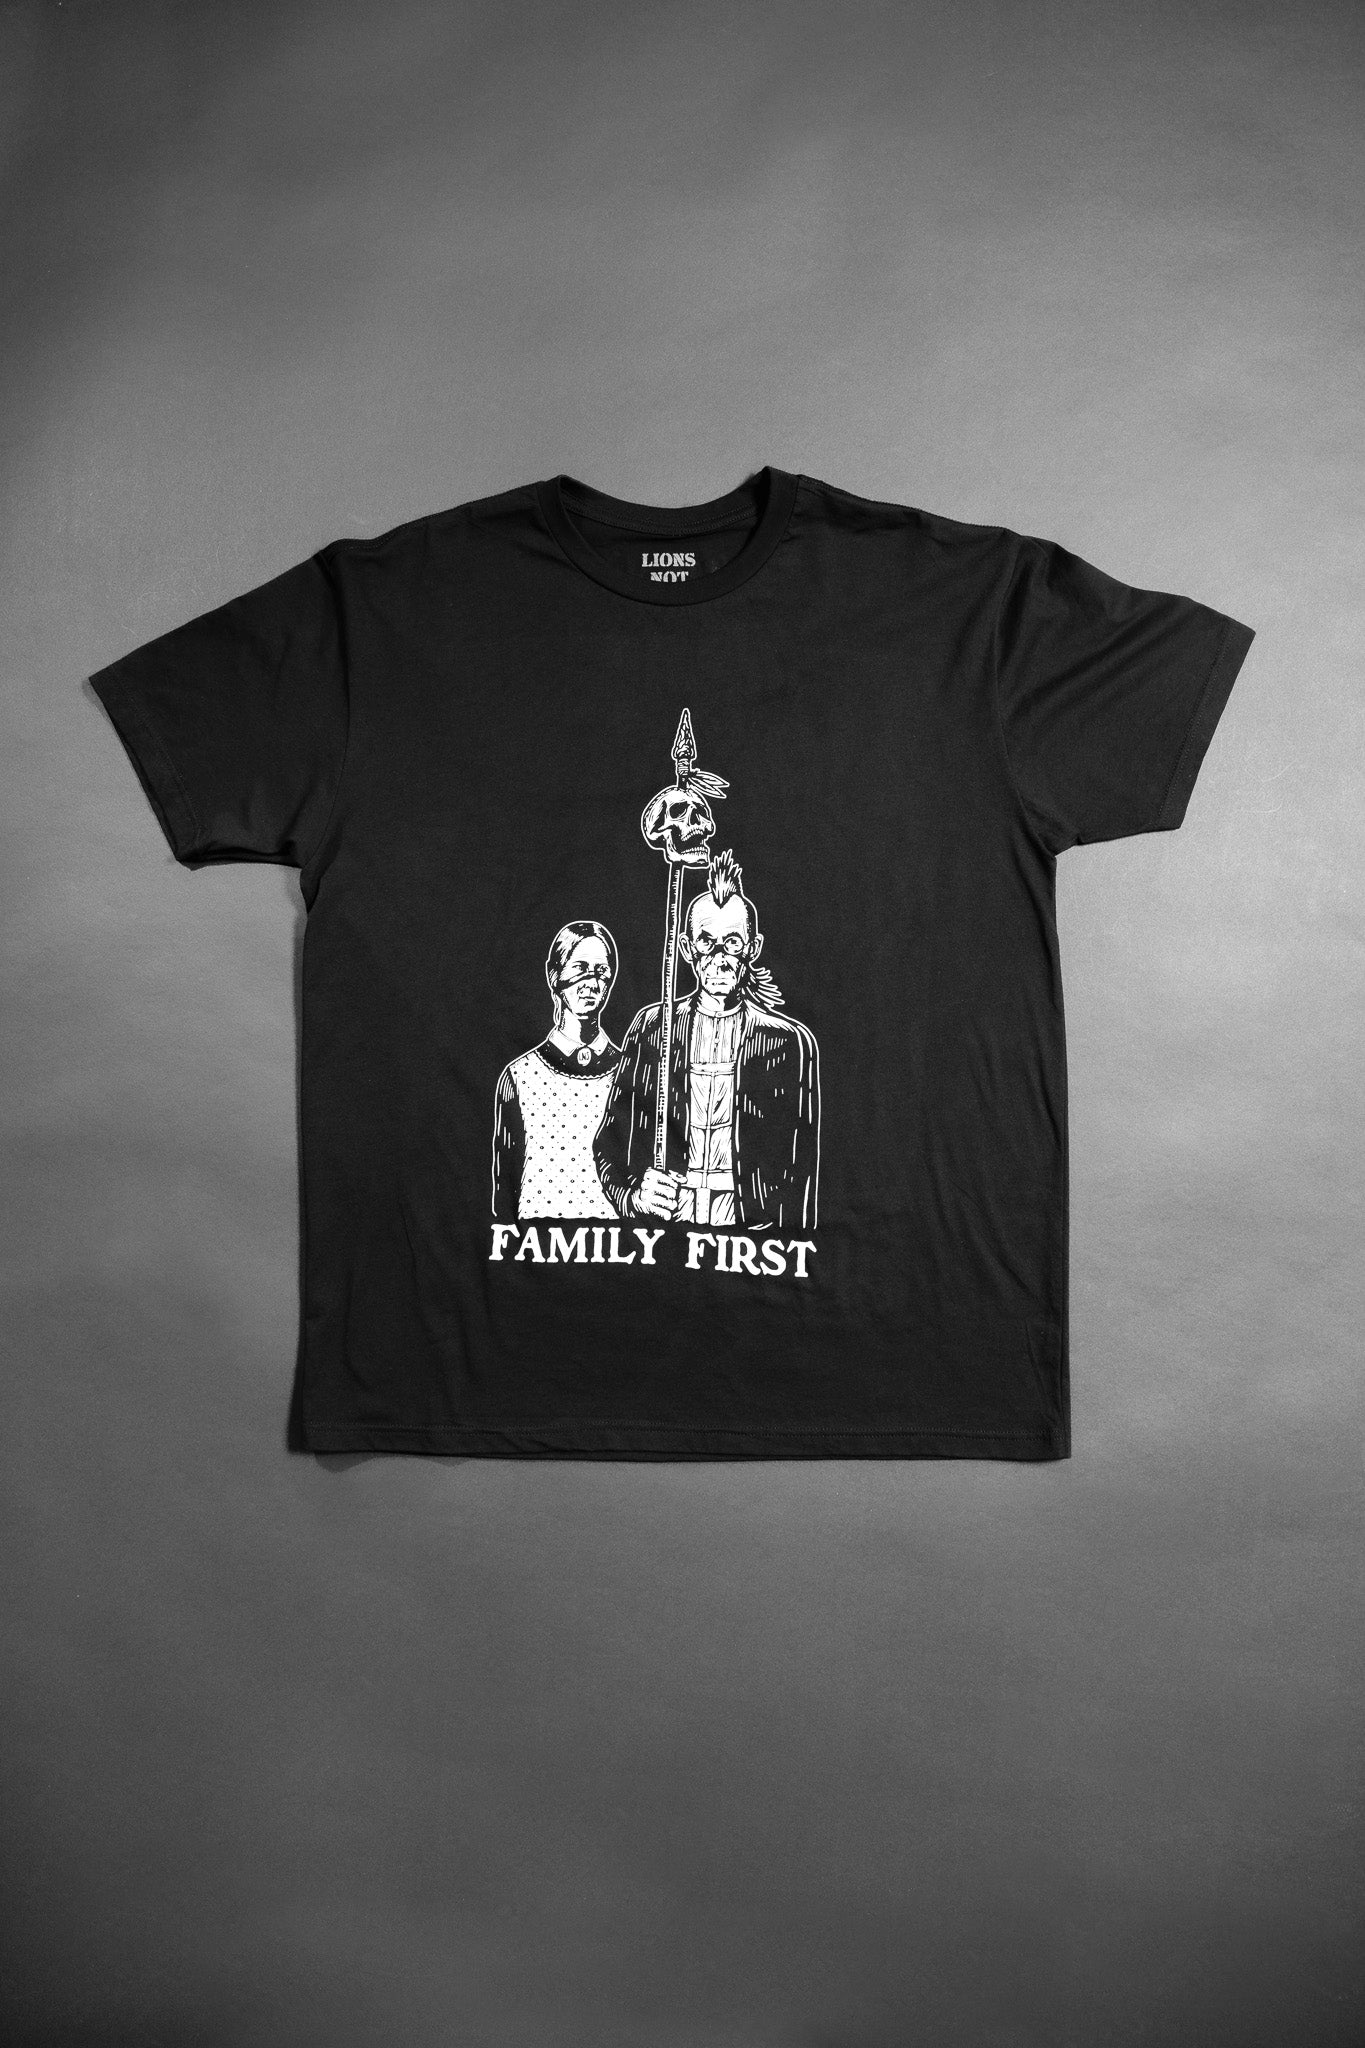 Lions Not Sheep “Family First” Tee - Lions Not Sheep ®